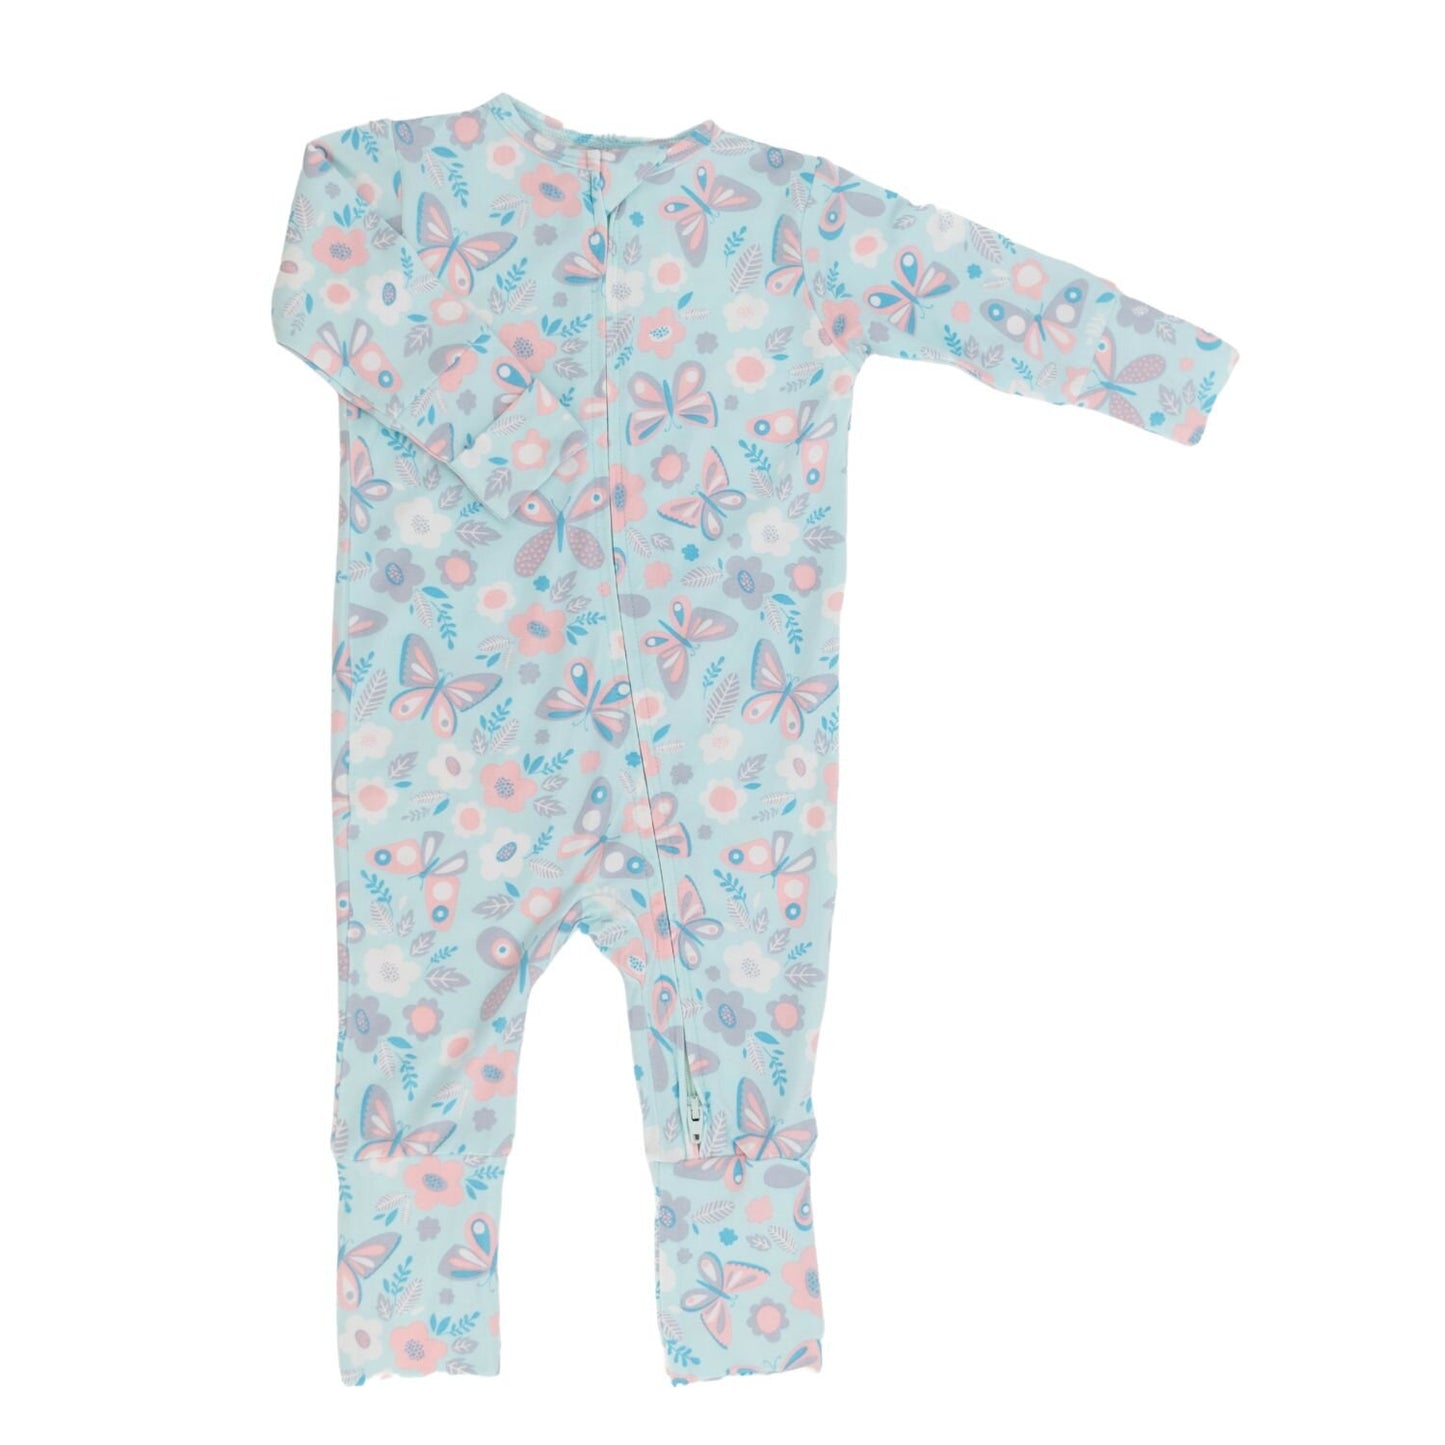 Butterfly Aqua Bamboo Zipper Romper.  Safe for sensitive skin. Tagless label for total comfort.  Machine washable and dryable!  95% Viscose from Bamboo 5% Spandex.